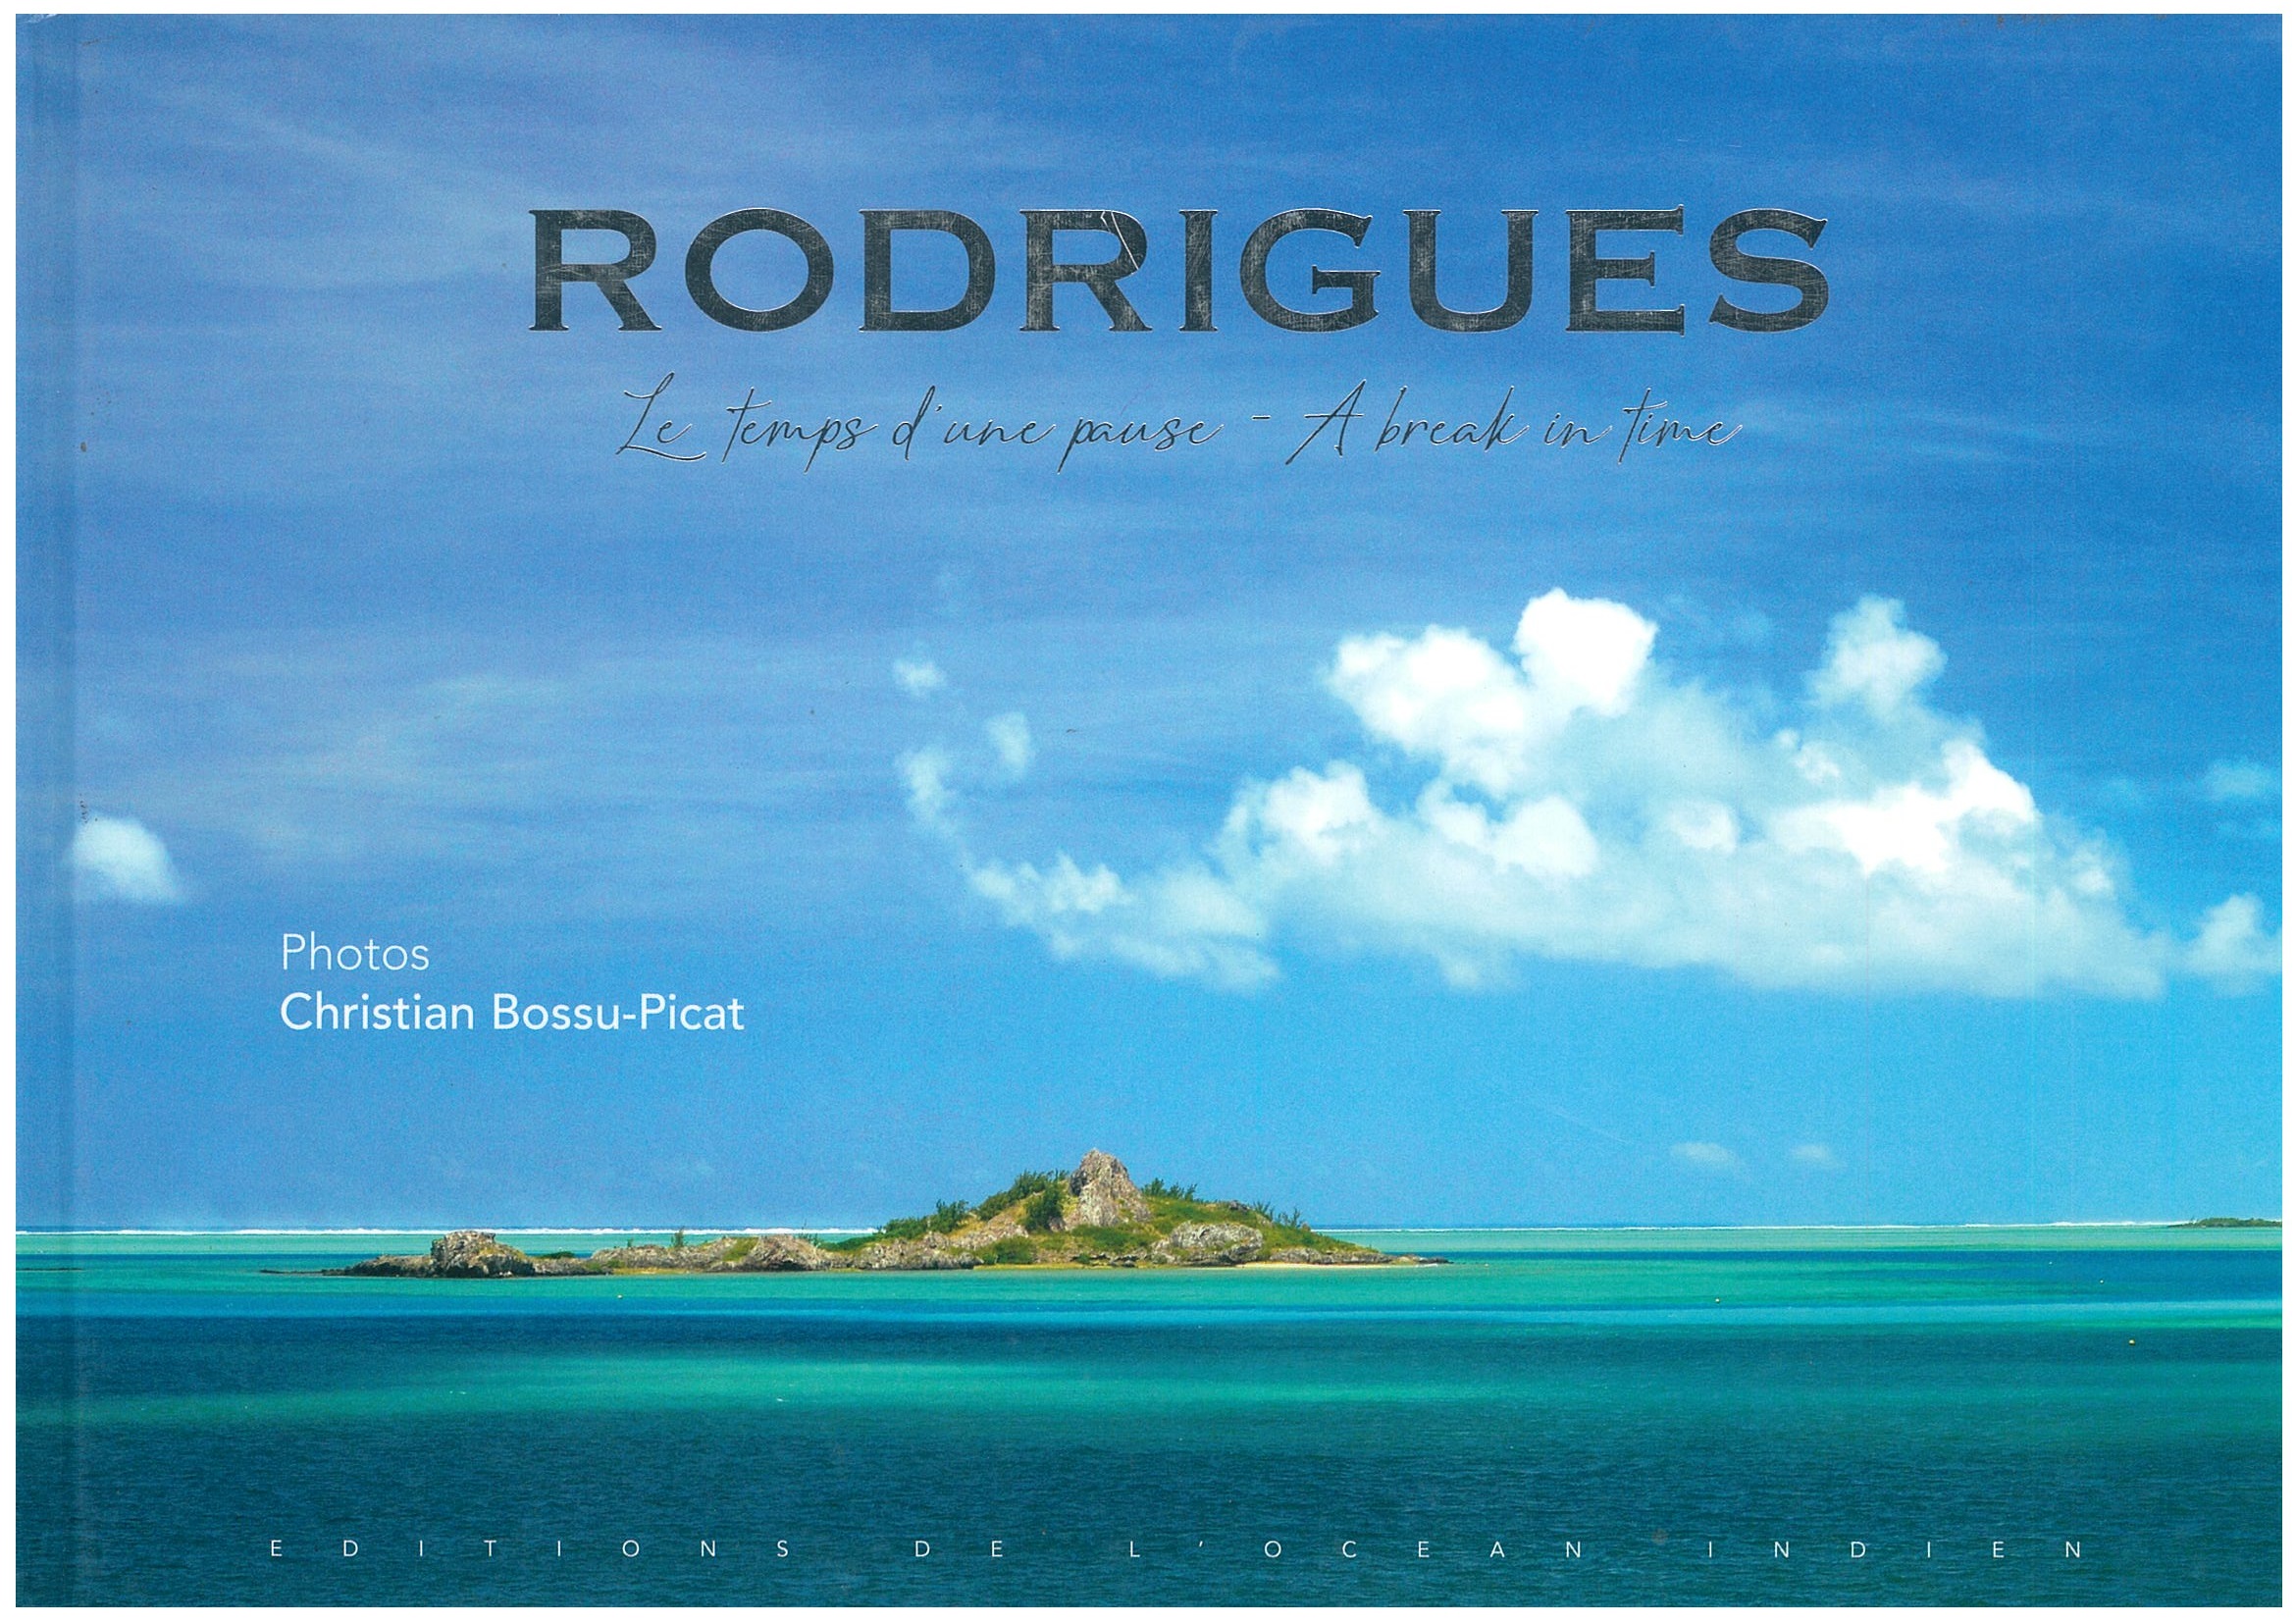 RODRIGUES Le temps d'une pause - A break in time Photos by Christian Bossu-Picat